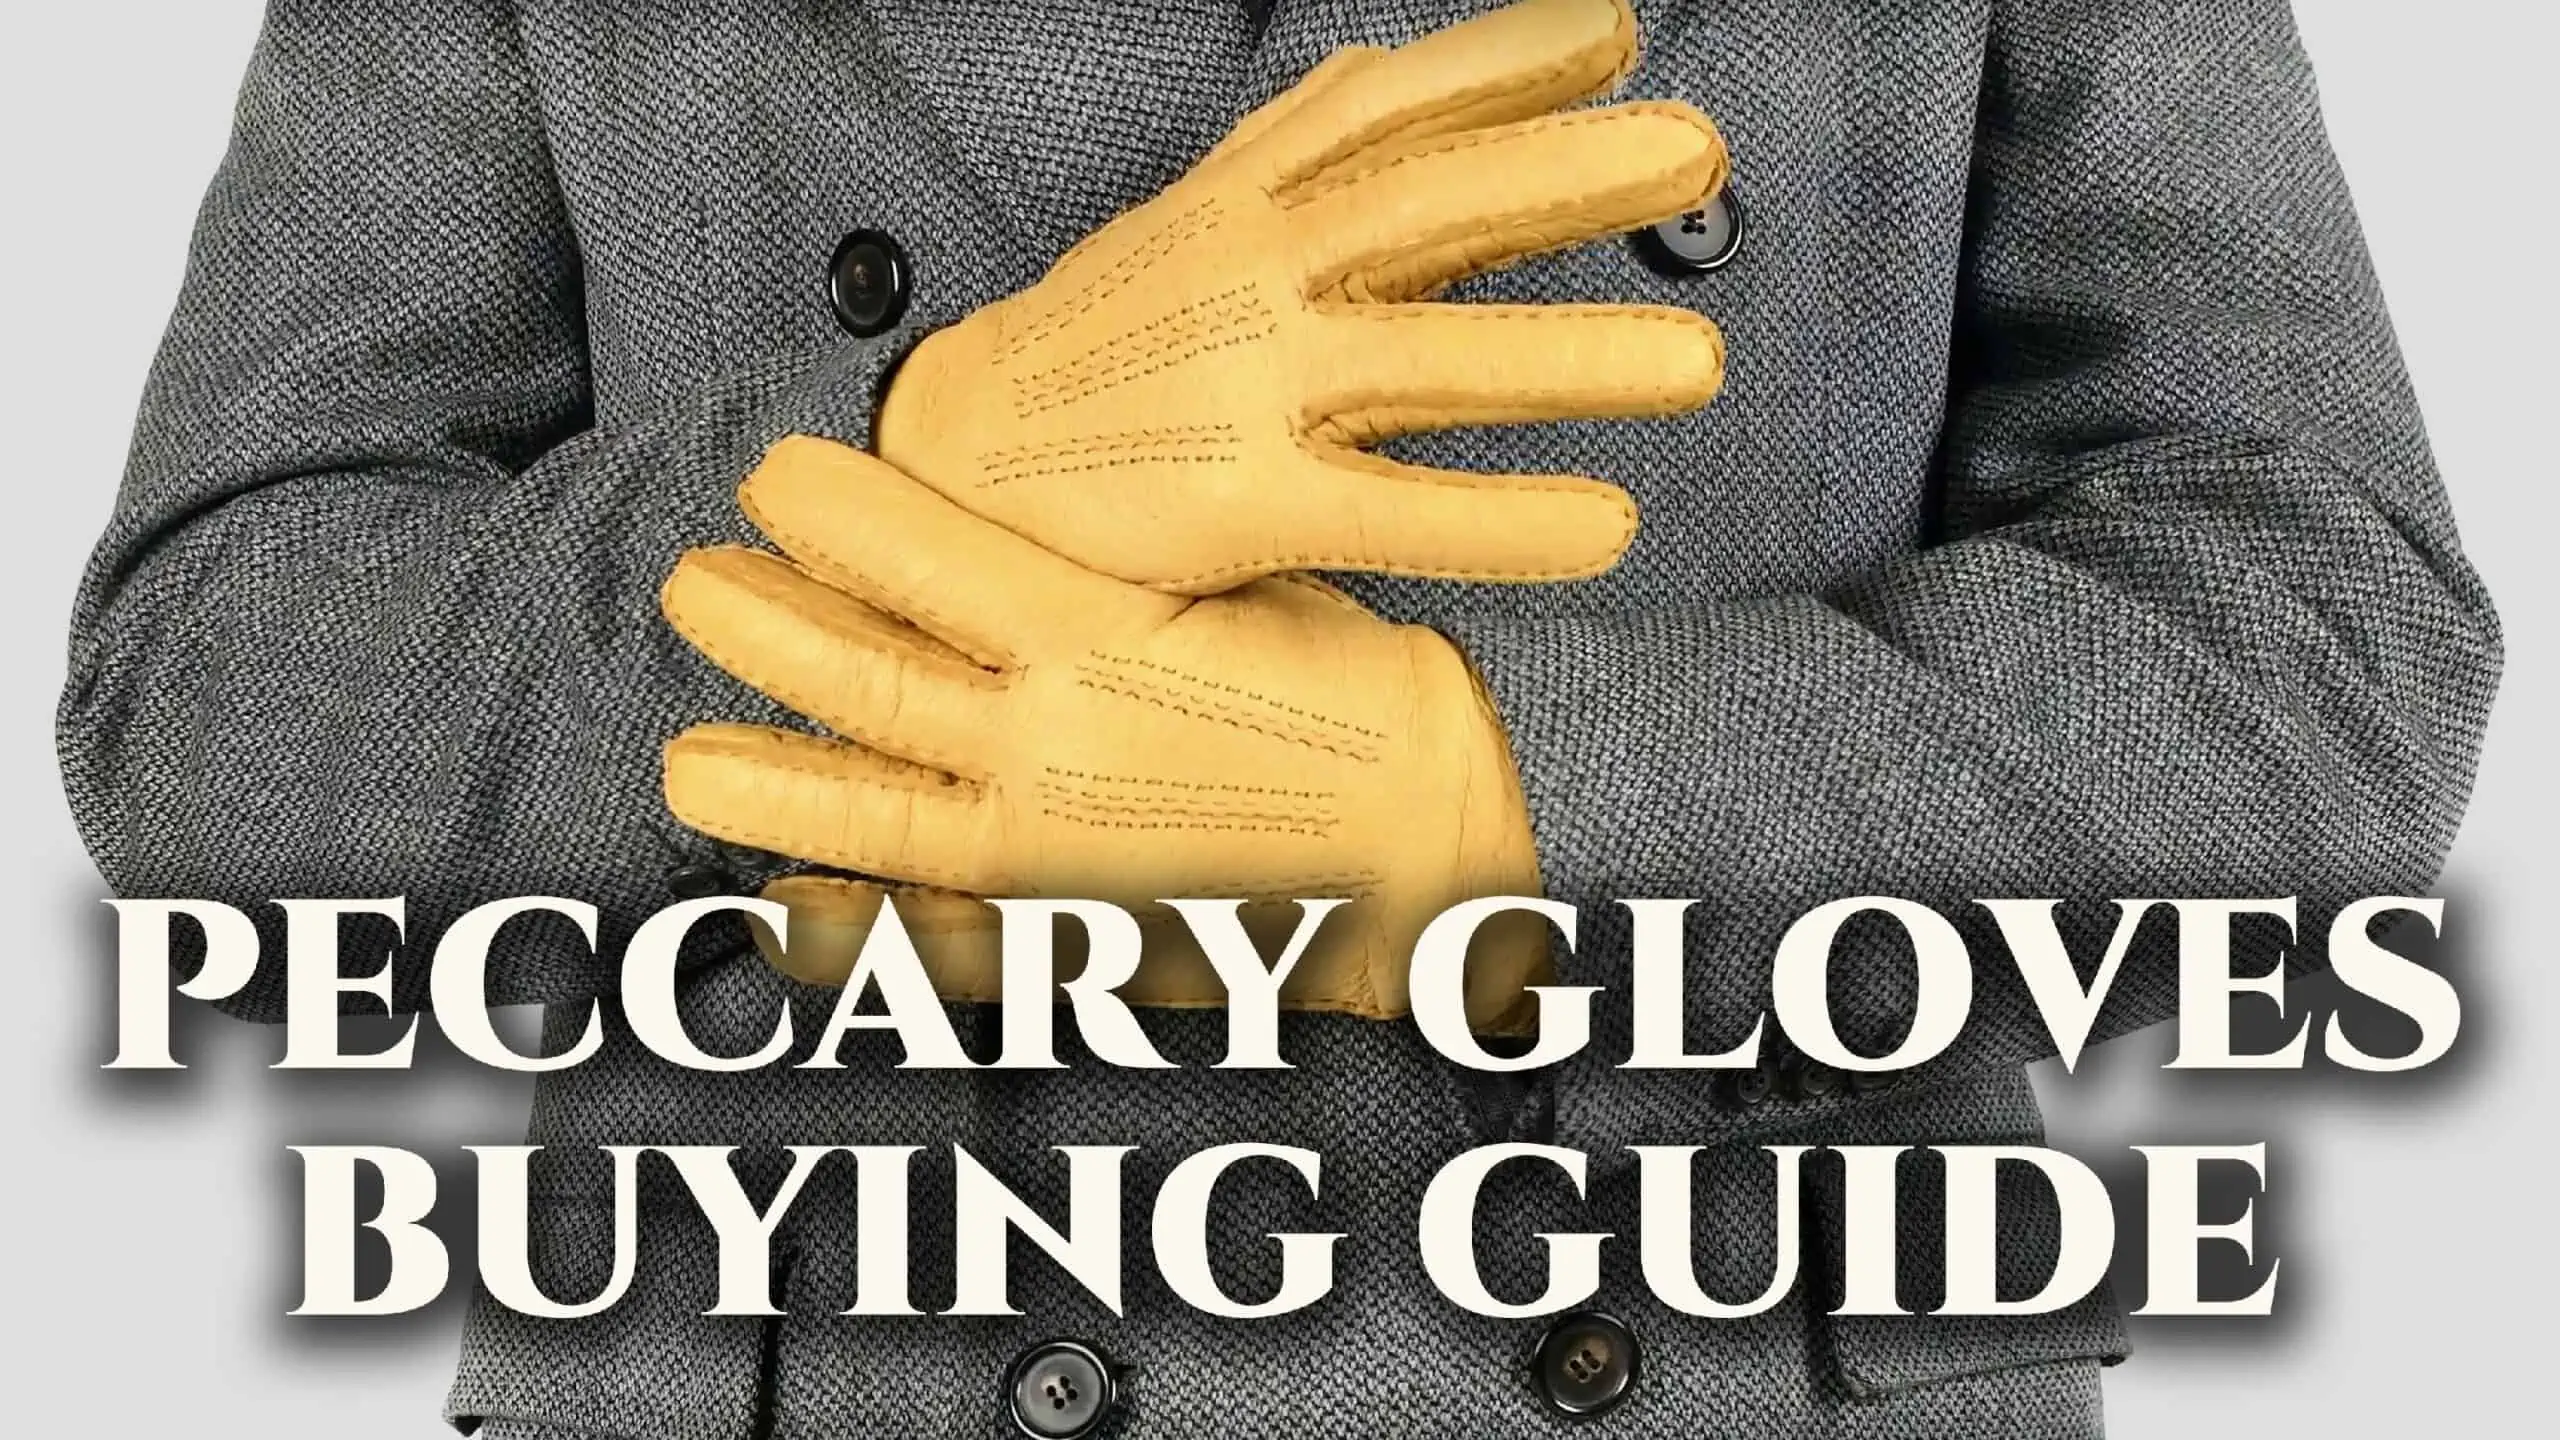 Peccary Gloves Buying